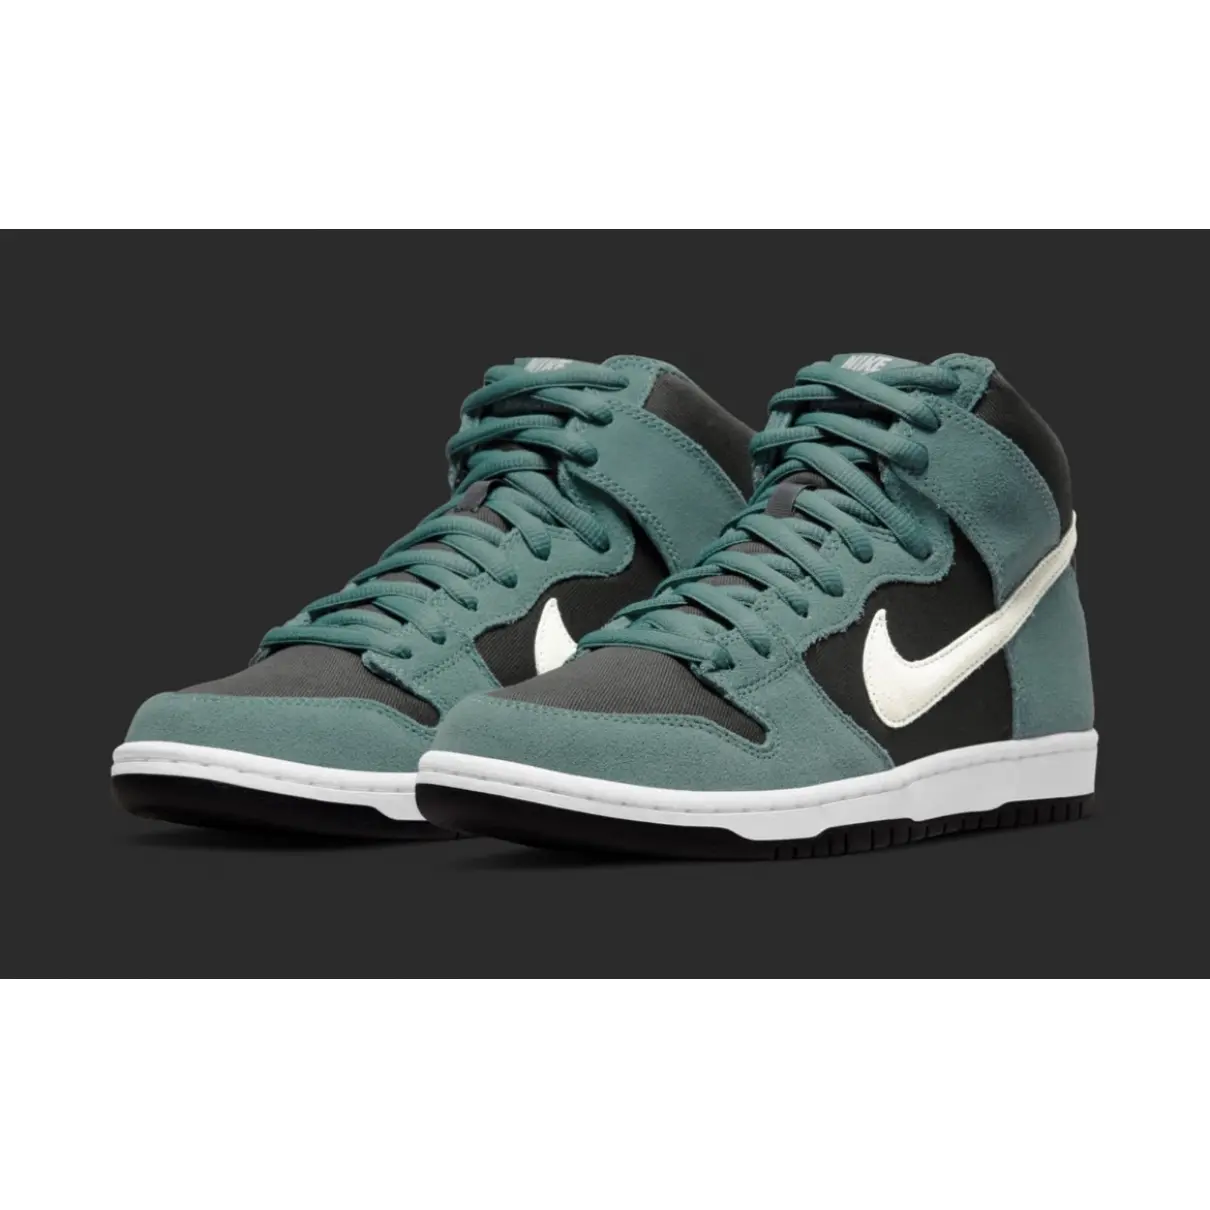 Buy Nike SB Dunk high trainers online